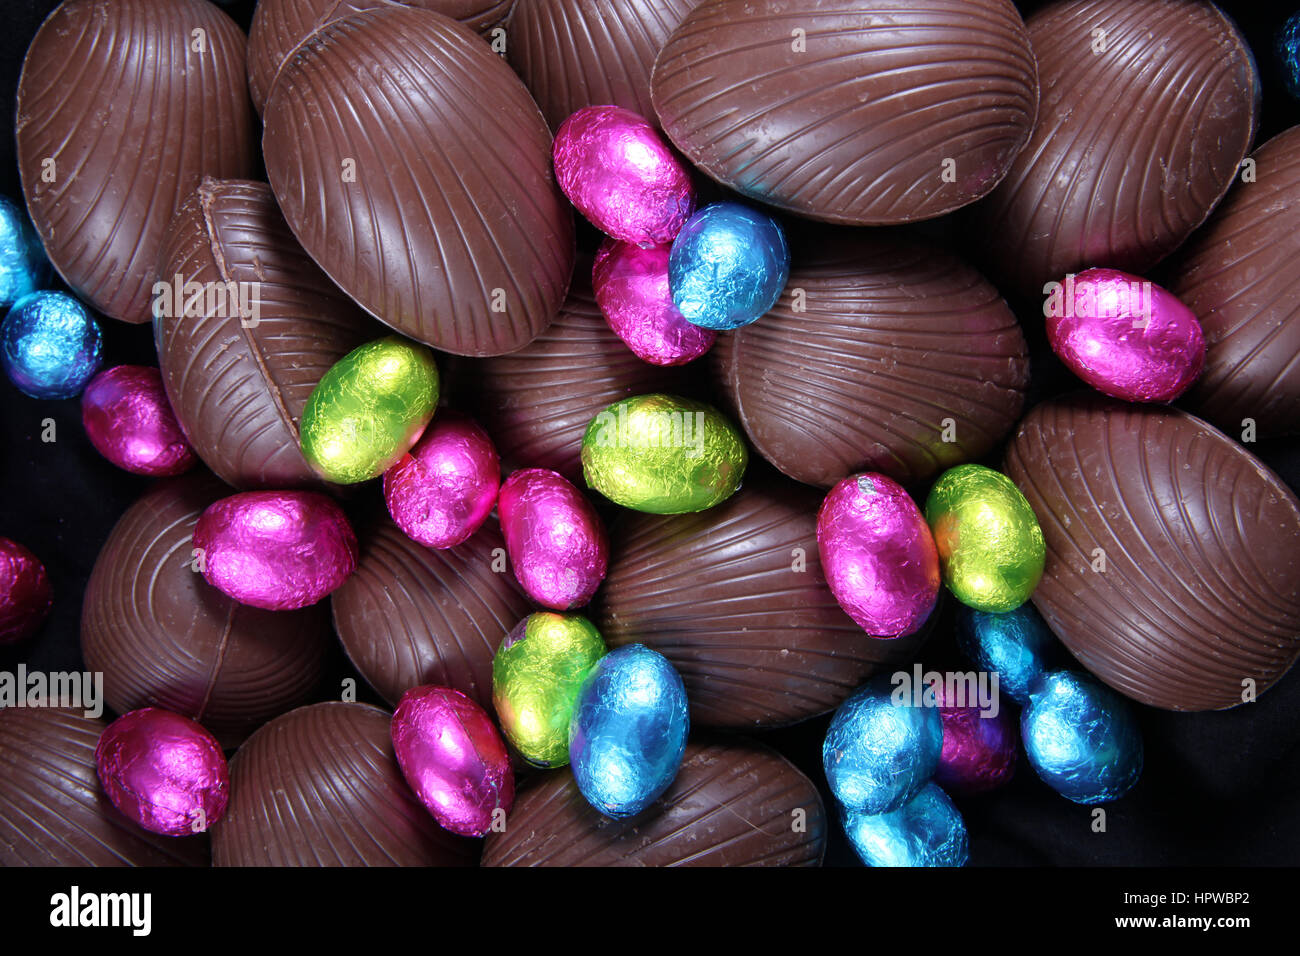 Pile of foil wrapped & unwrapped chocolate easter eggs in pink, blue & lime green. Stock Photo